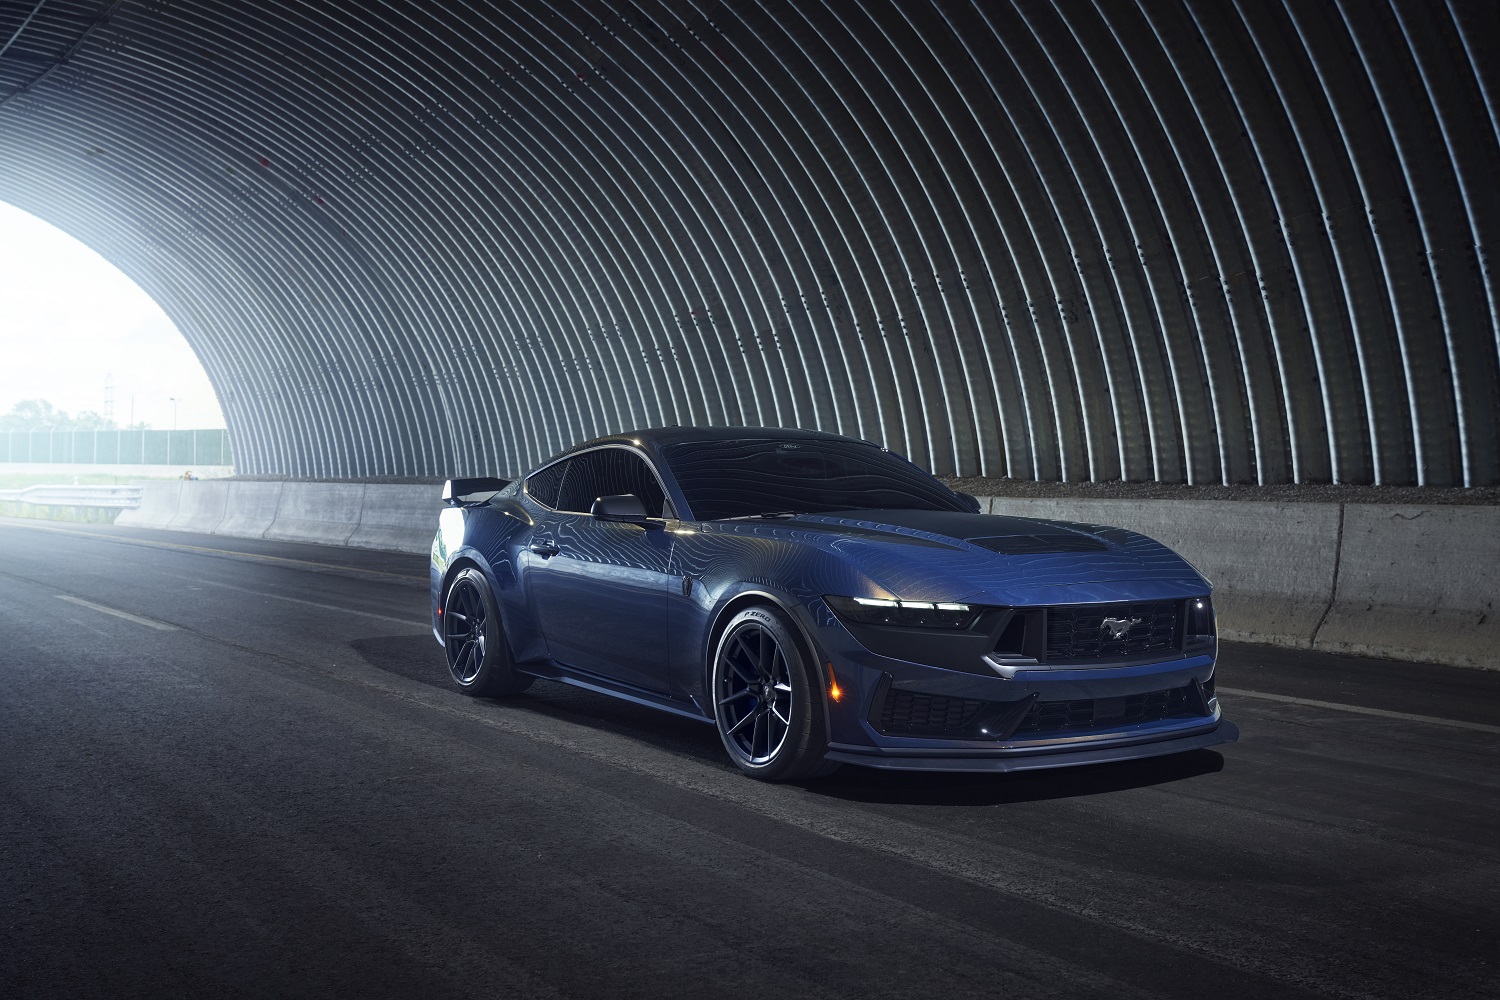 Ford Mustang Dark Horse lays ground for racing ponies. Image by Ford.